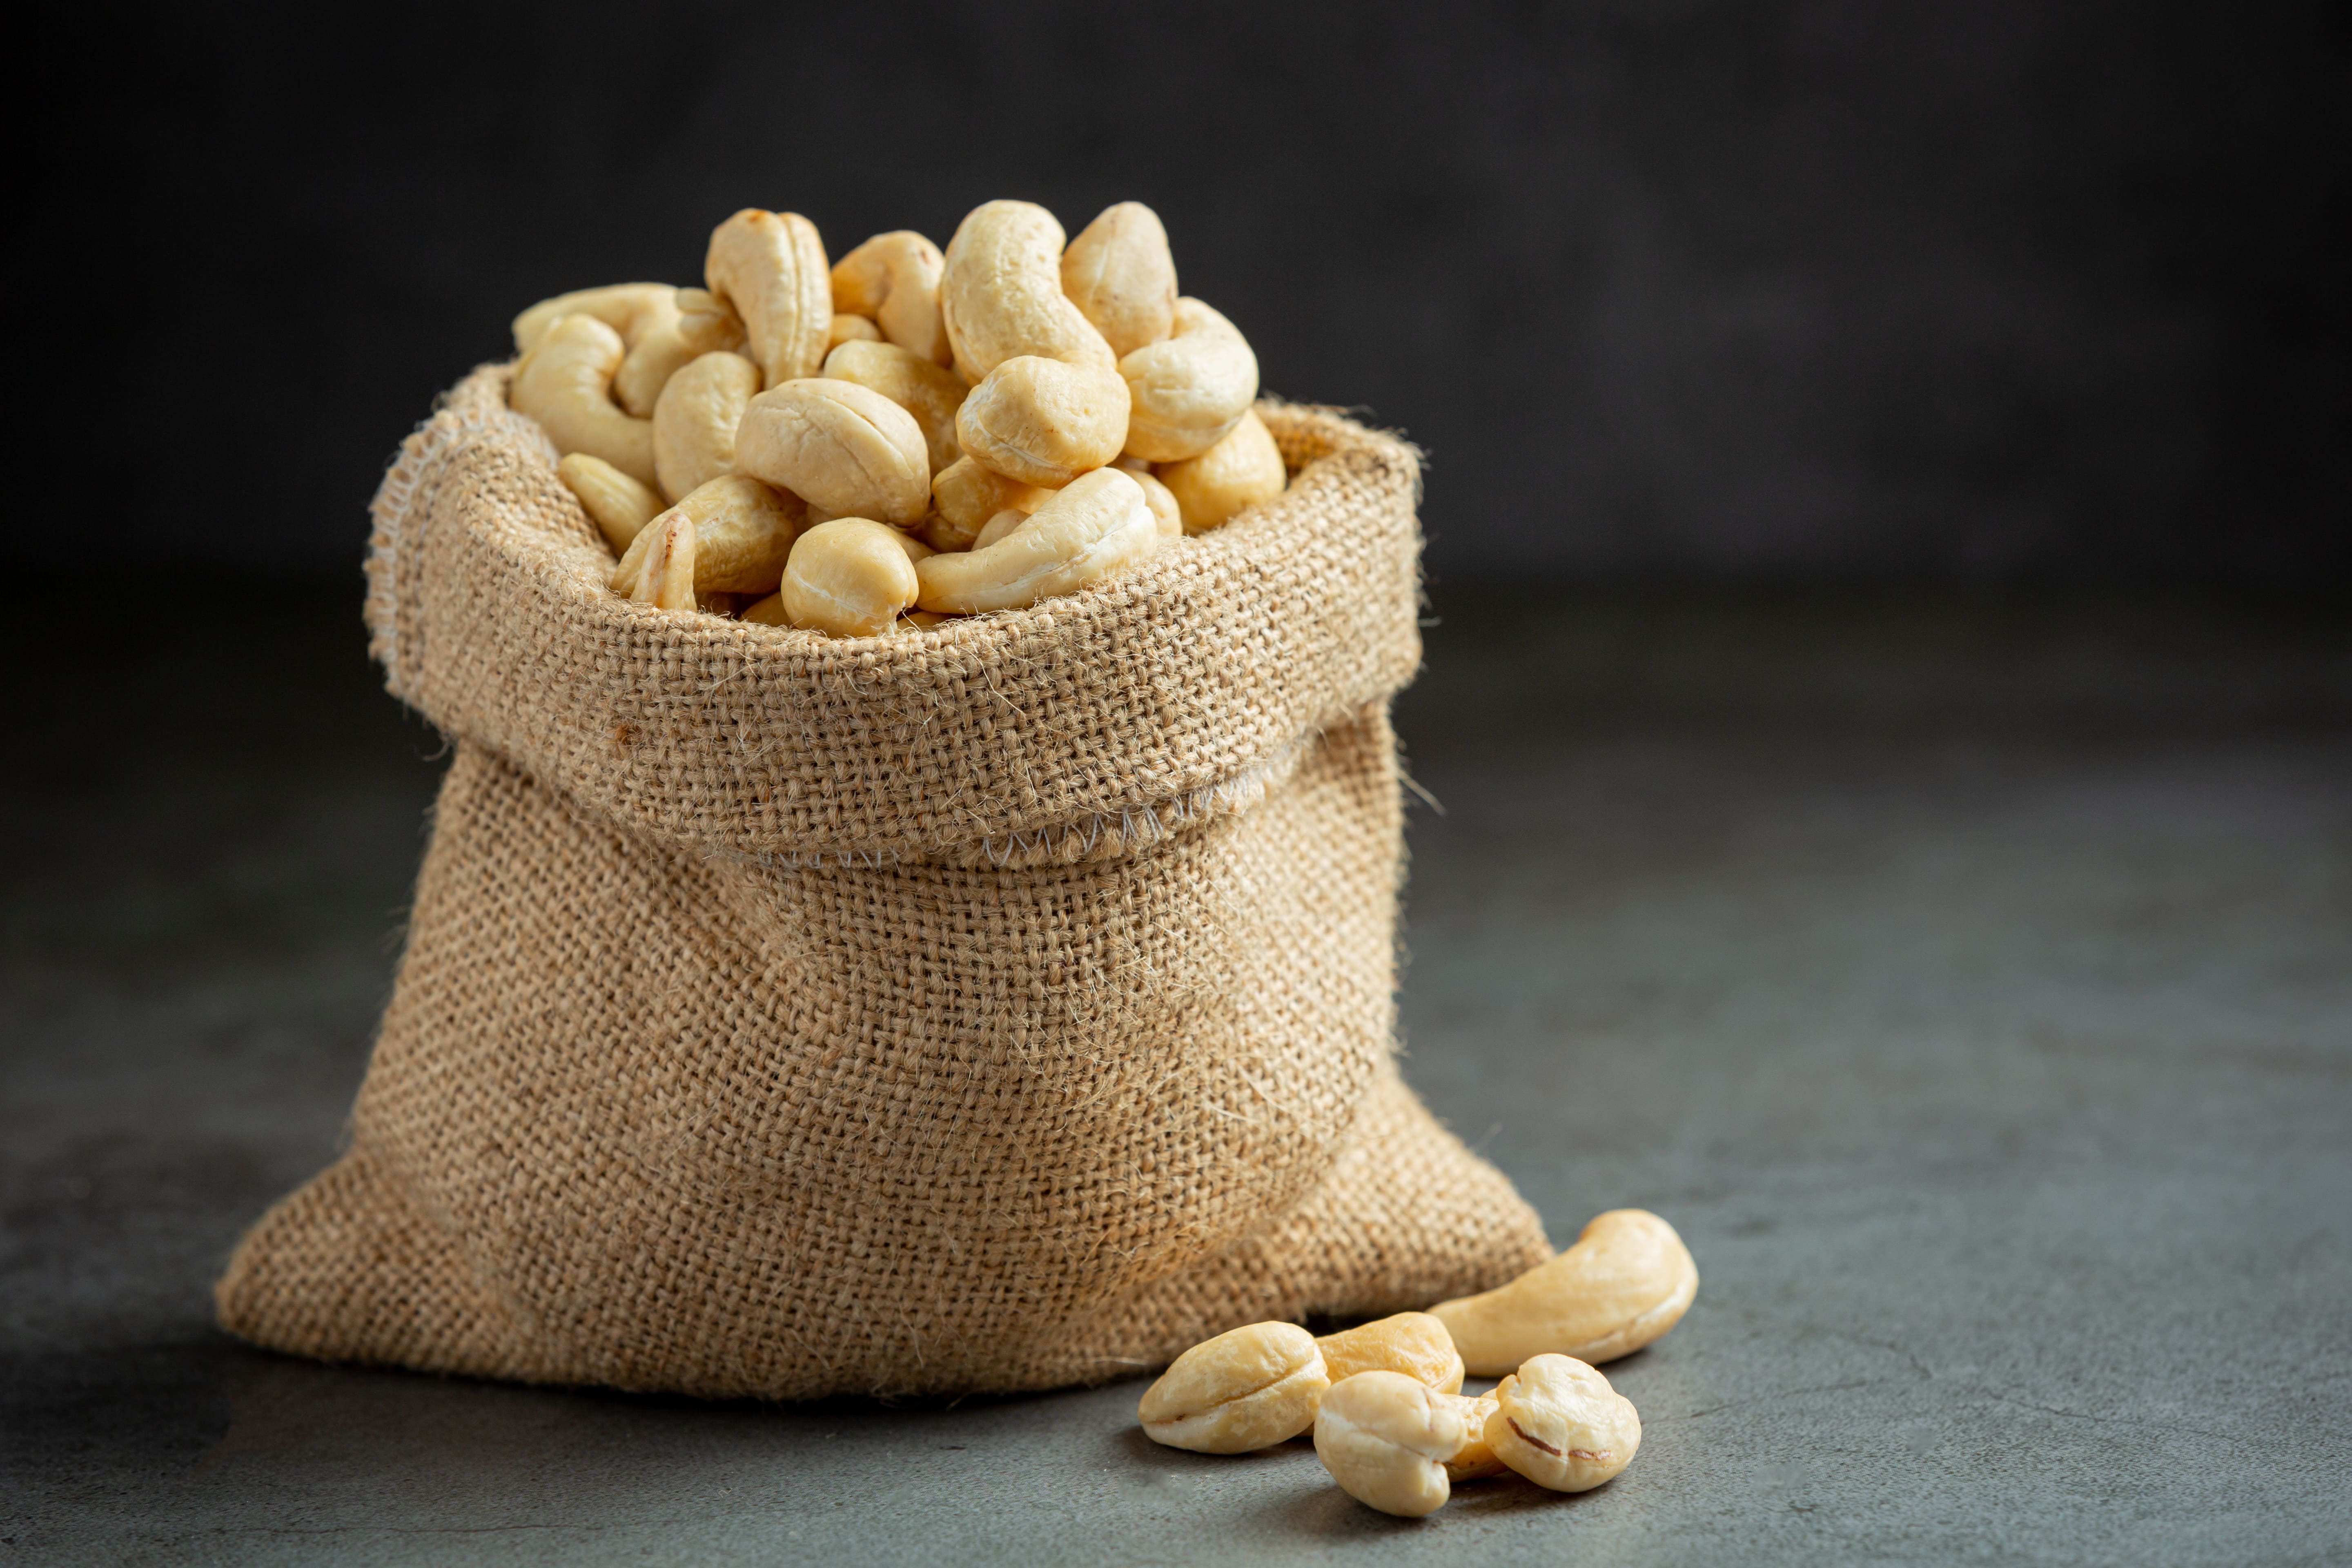 Cashew suppliers In India, Cashew Suppliers In India, Aaditya Traders Suppliers In India, Best Cashew Suppliers In India, Best Suppliers In India, Premium Suppliers In India, Cashew Supplier In India